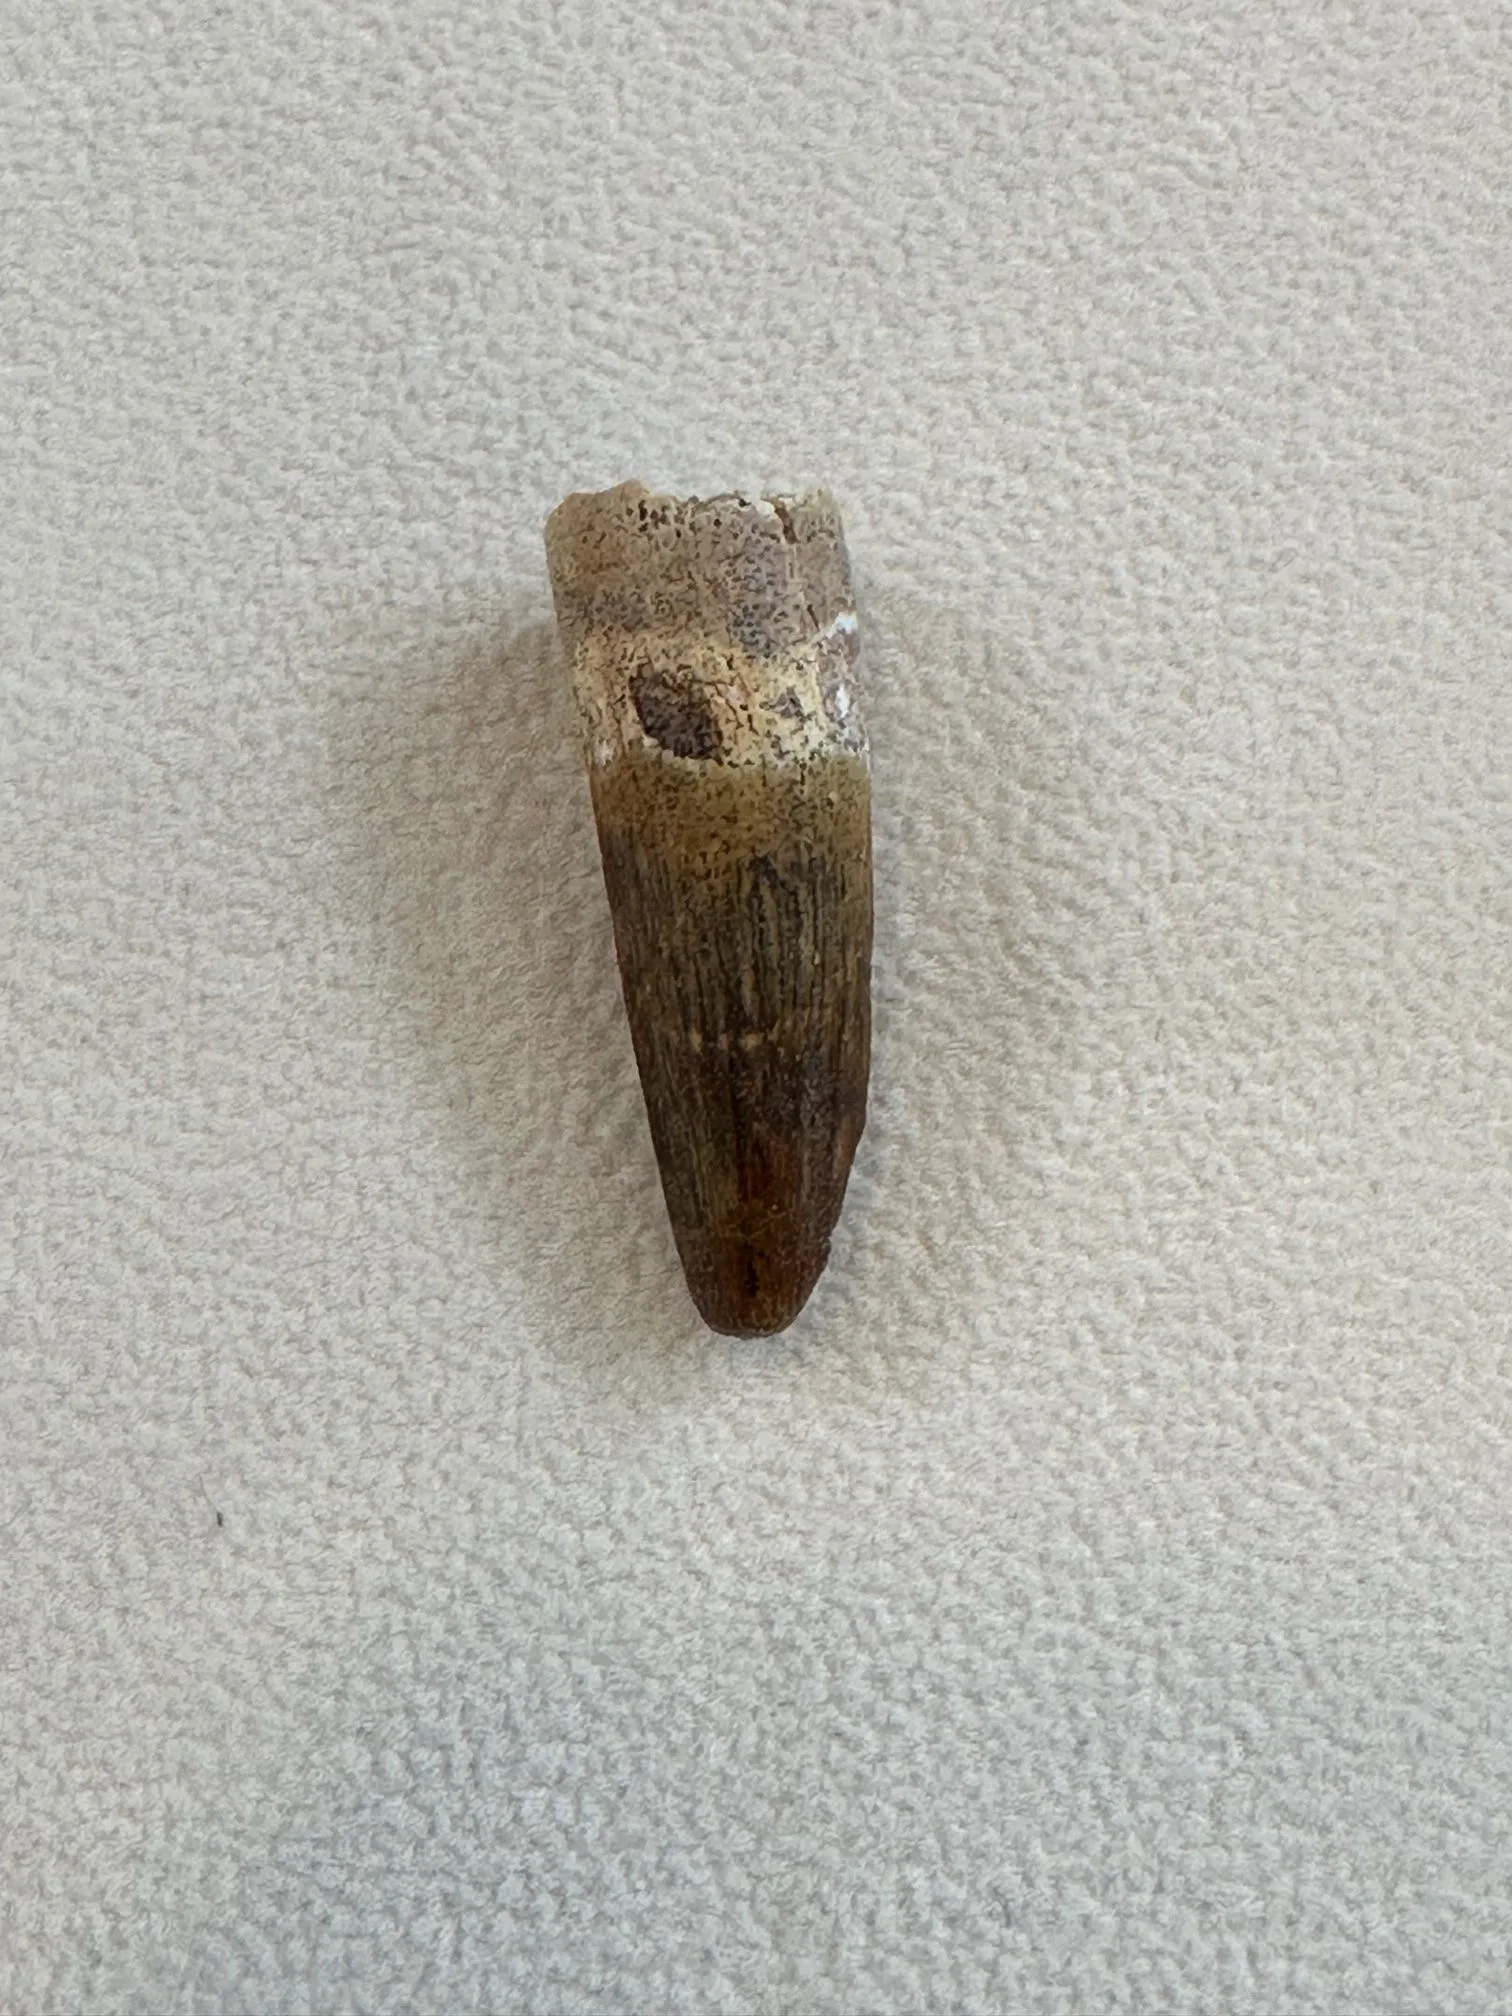 Spinosaurus Tooth, Morocco, 1 1/2 inch long Prehistoric Online